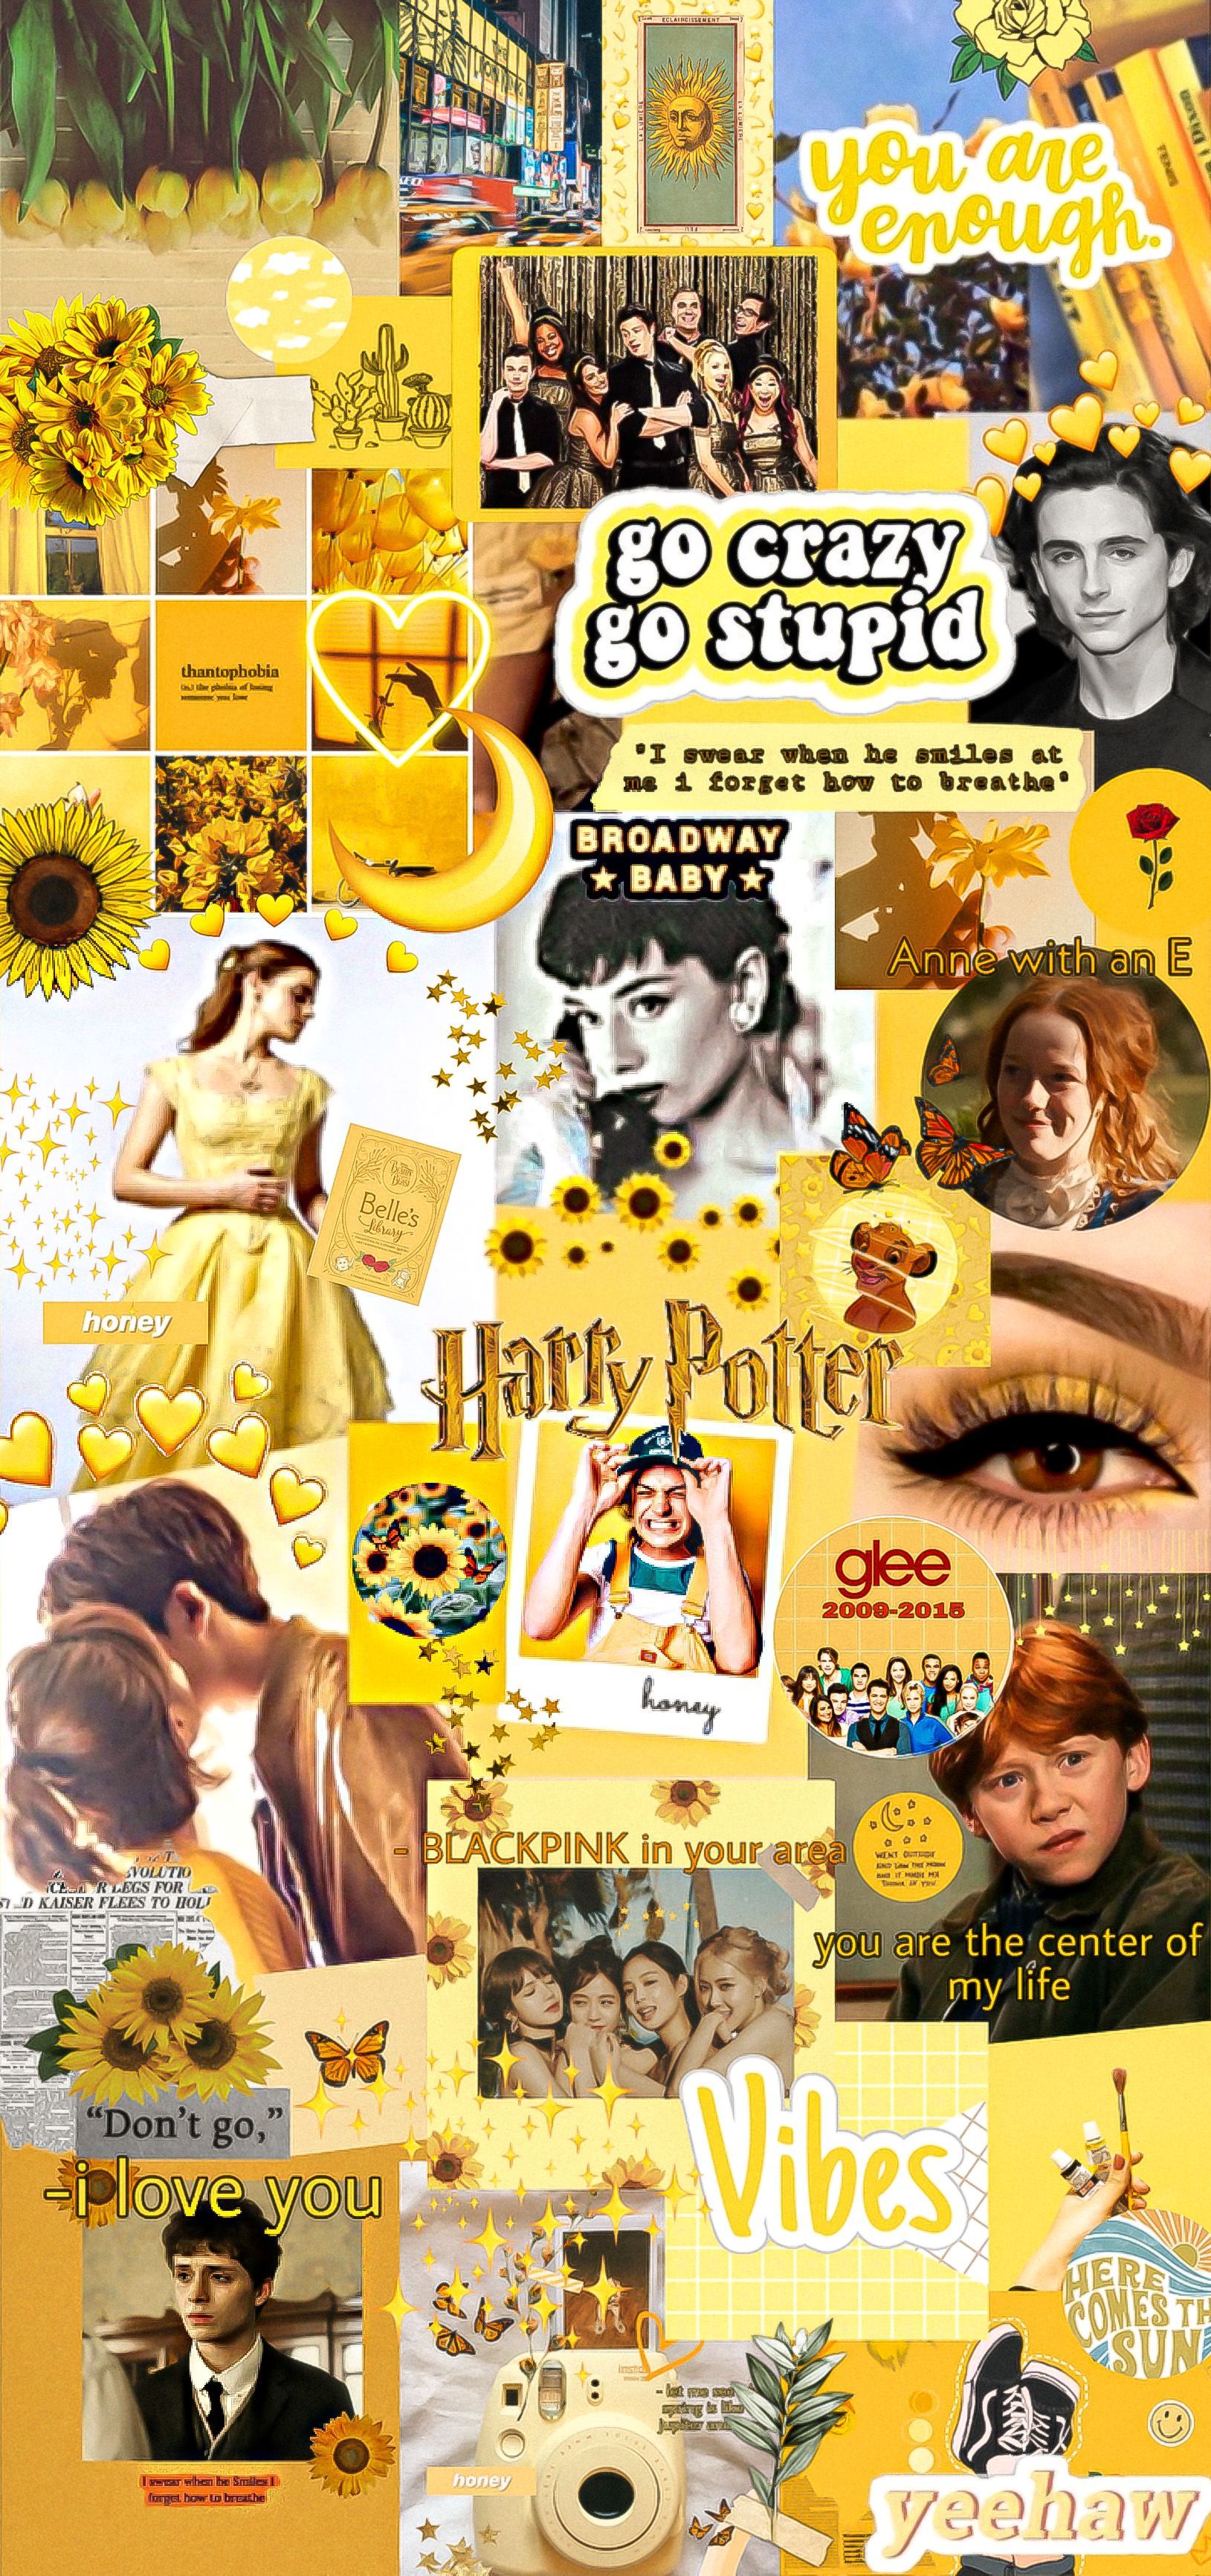 Aesthetic phone background for yellow lovers! - Broadway